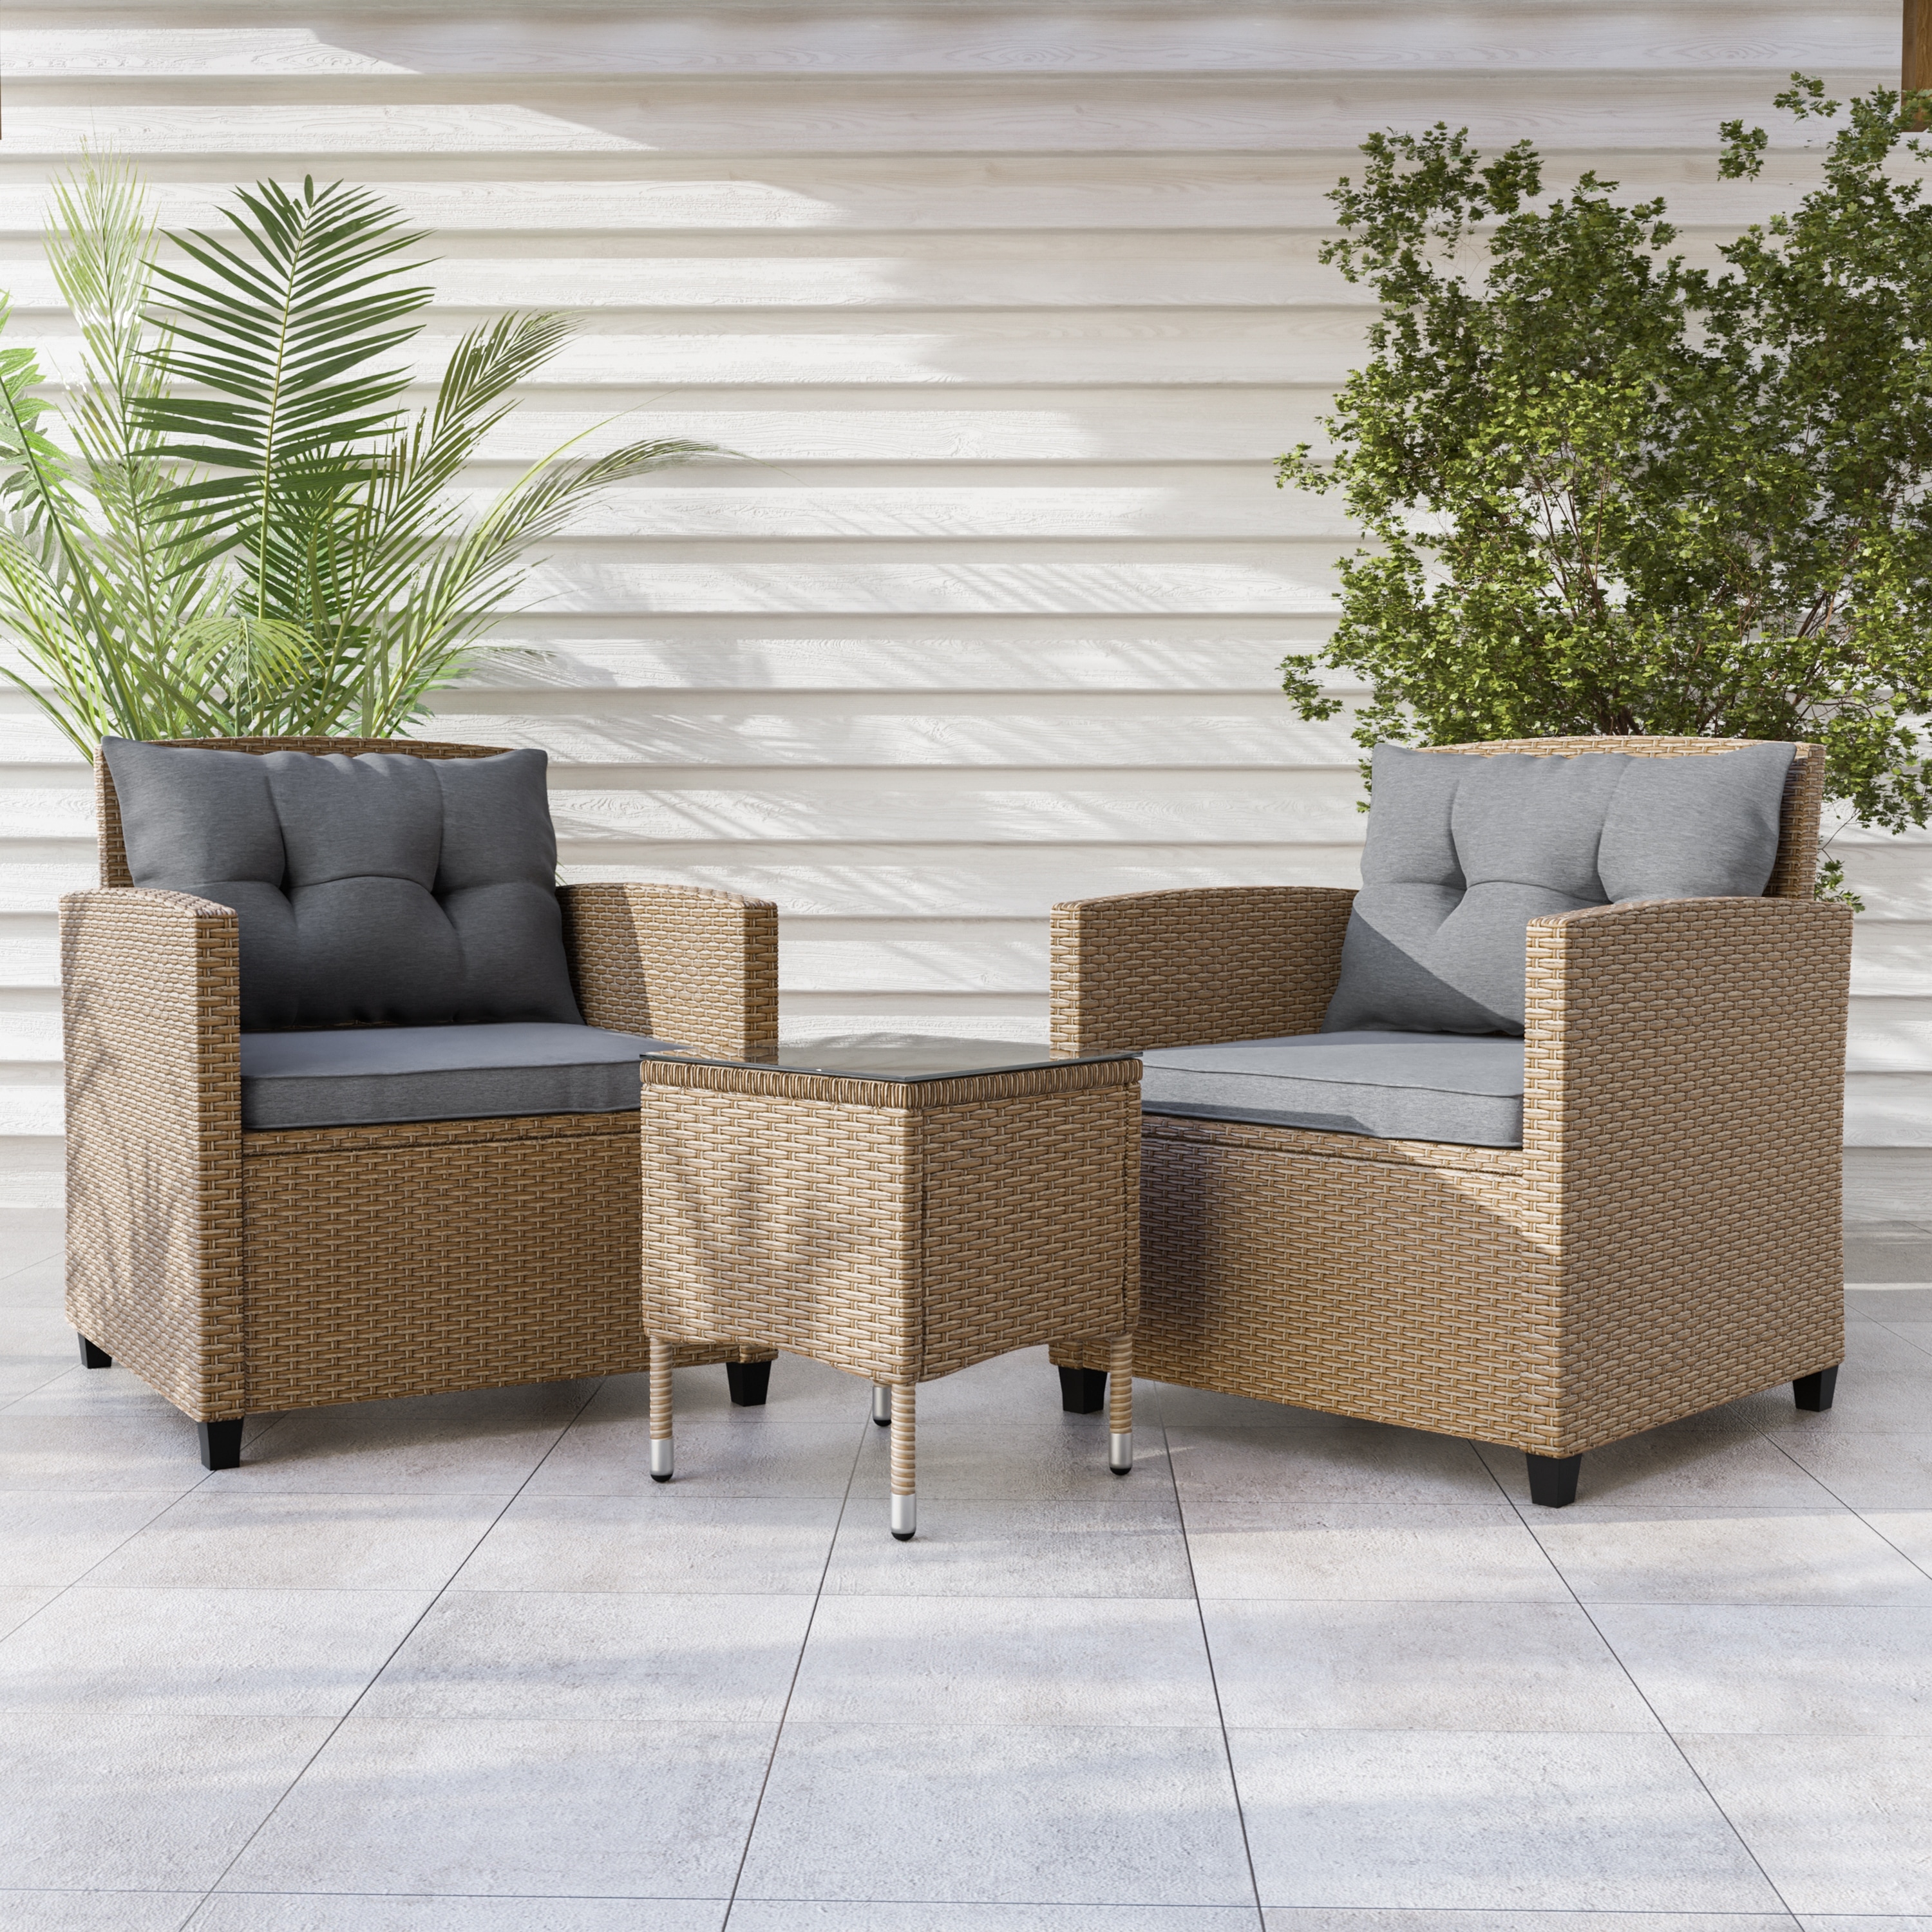 Alaya Modern Wicker 3-piece Outdoor Bistro Set For Patio By M&l Co